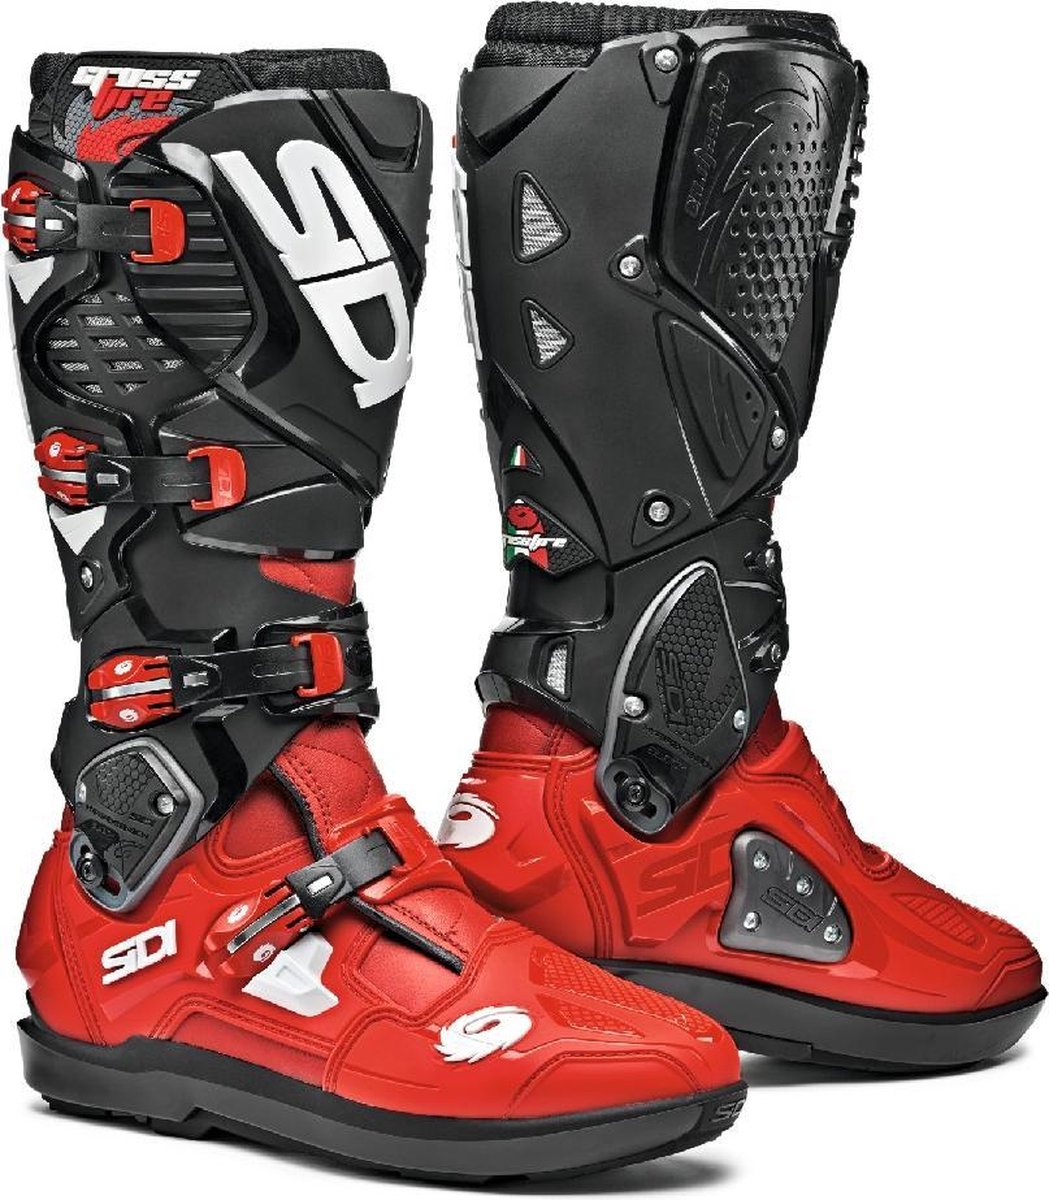 Sidi Crossfire 3 SRS Red Red Black Motorcycle Boots 46